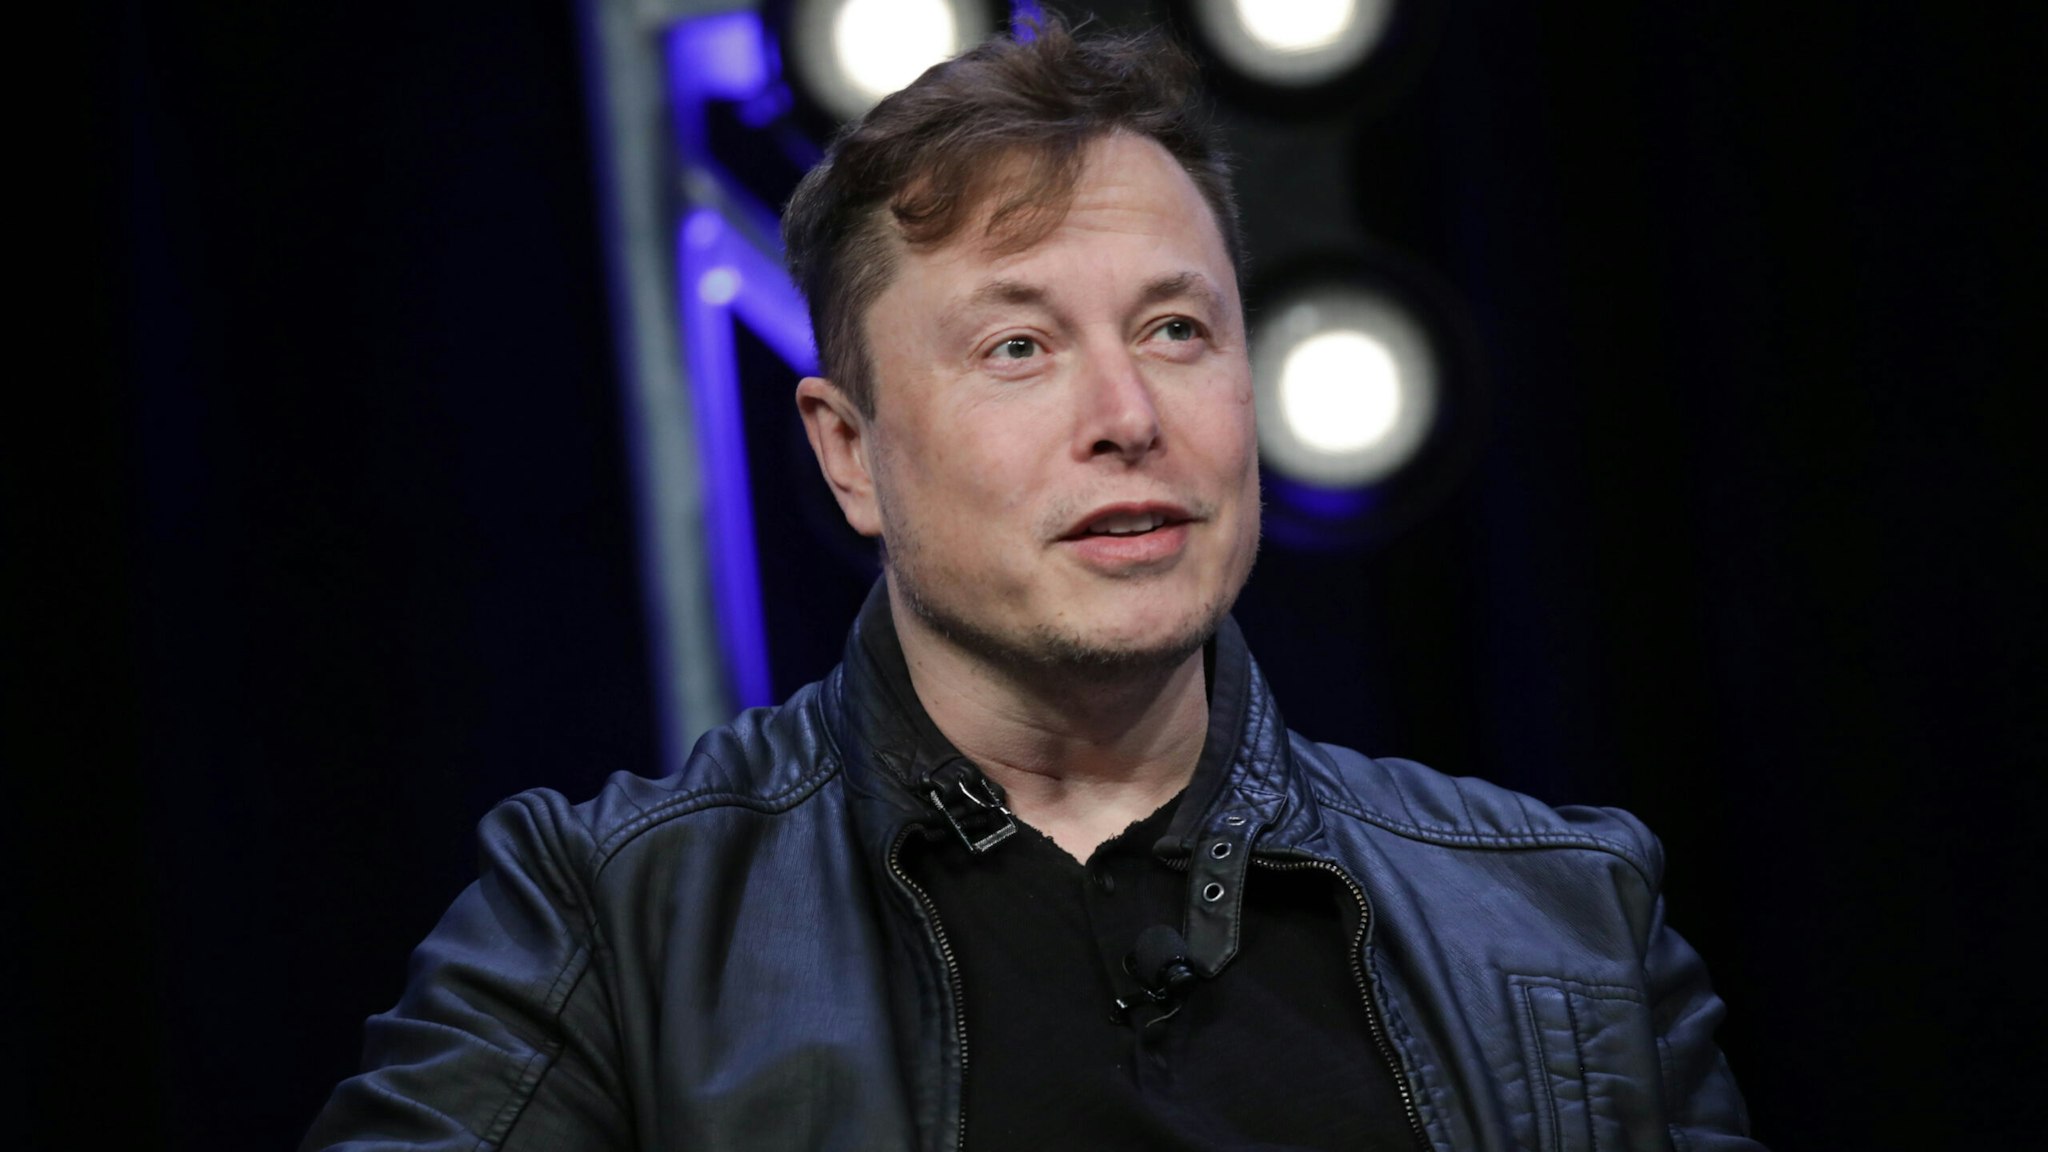 Elon Musk, Founder and Chief Engineer of SpaceX, speaks during the Satellite 2020 Conference in Washington, DC, United States on March 9, 2020.